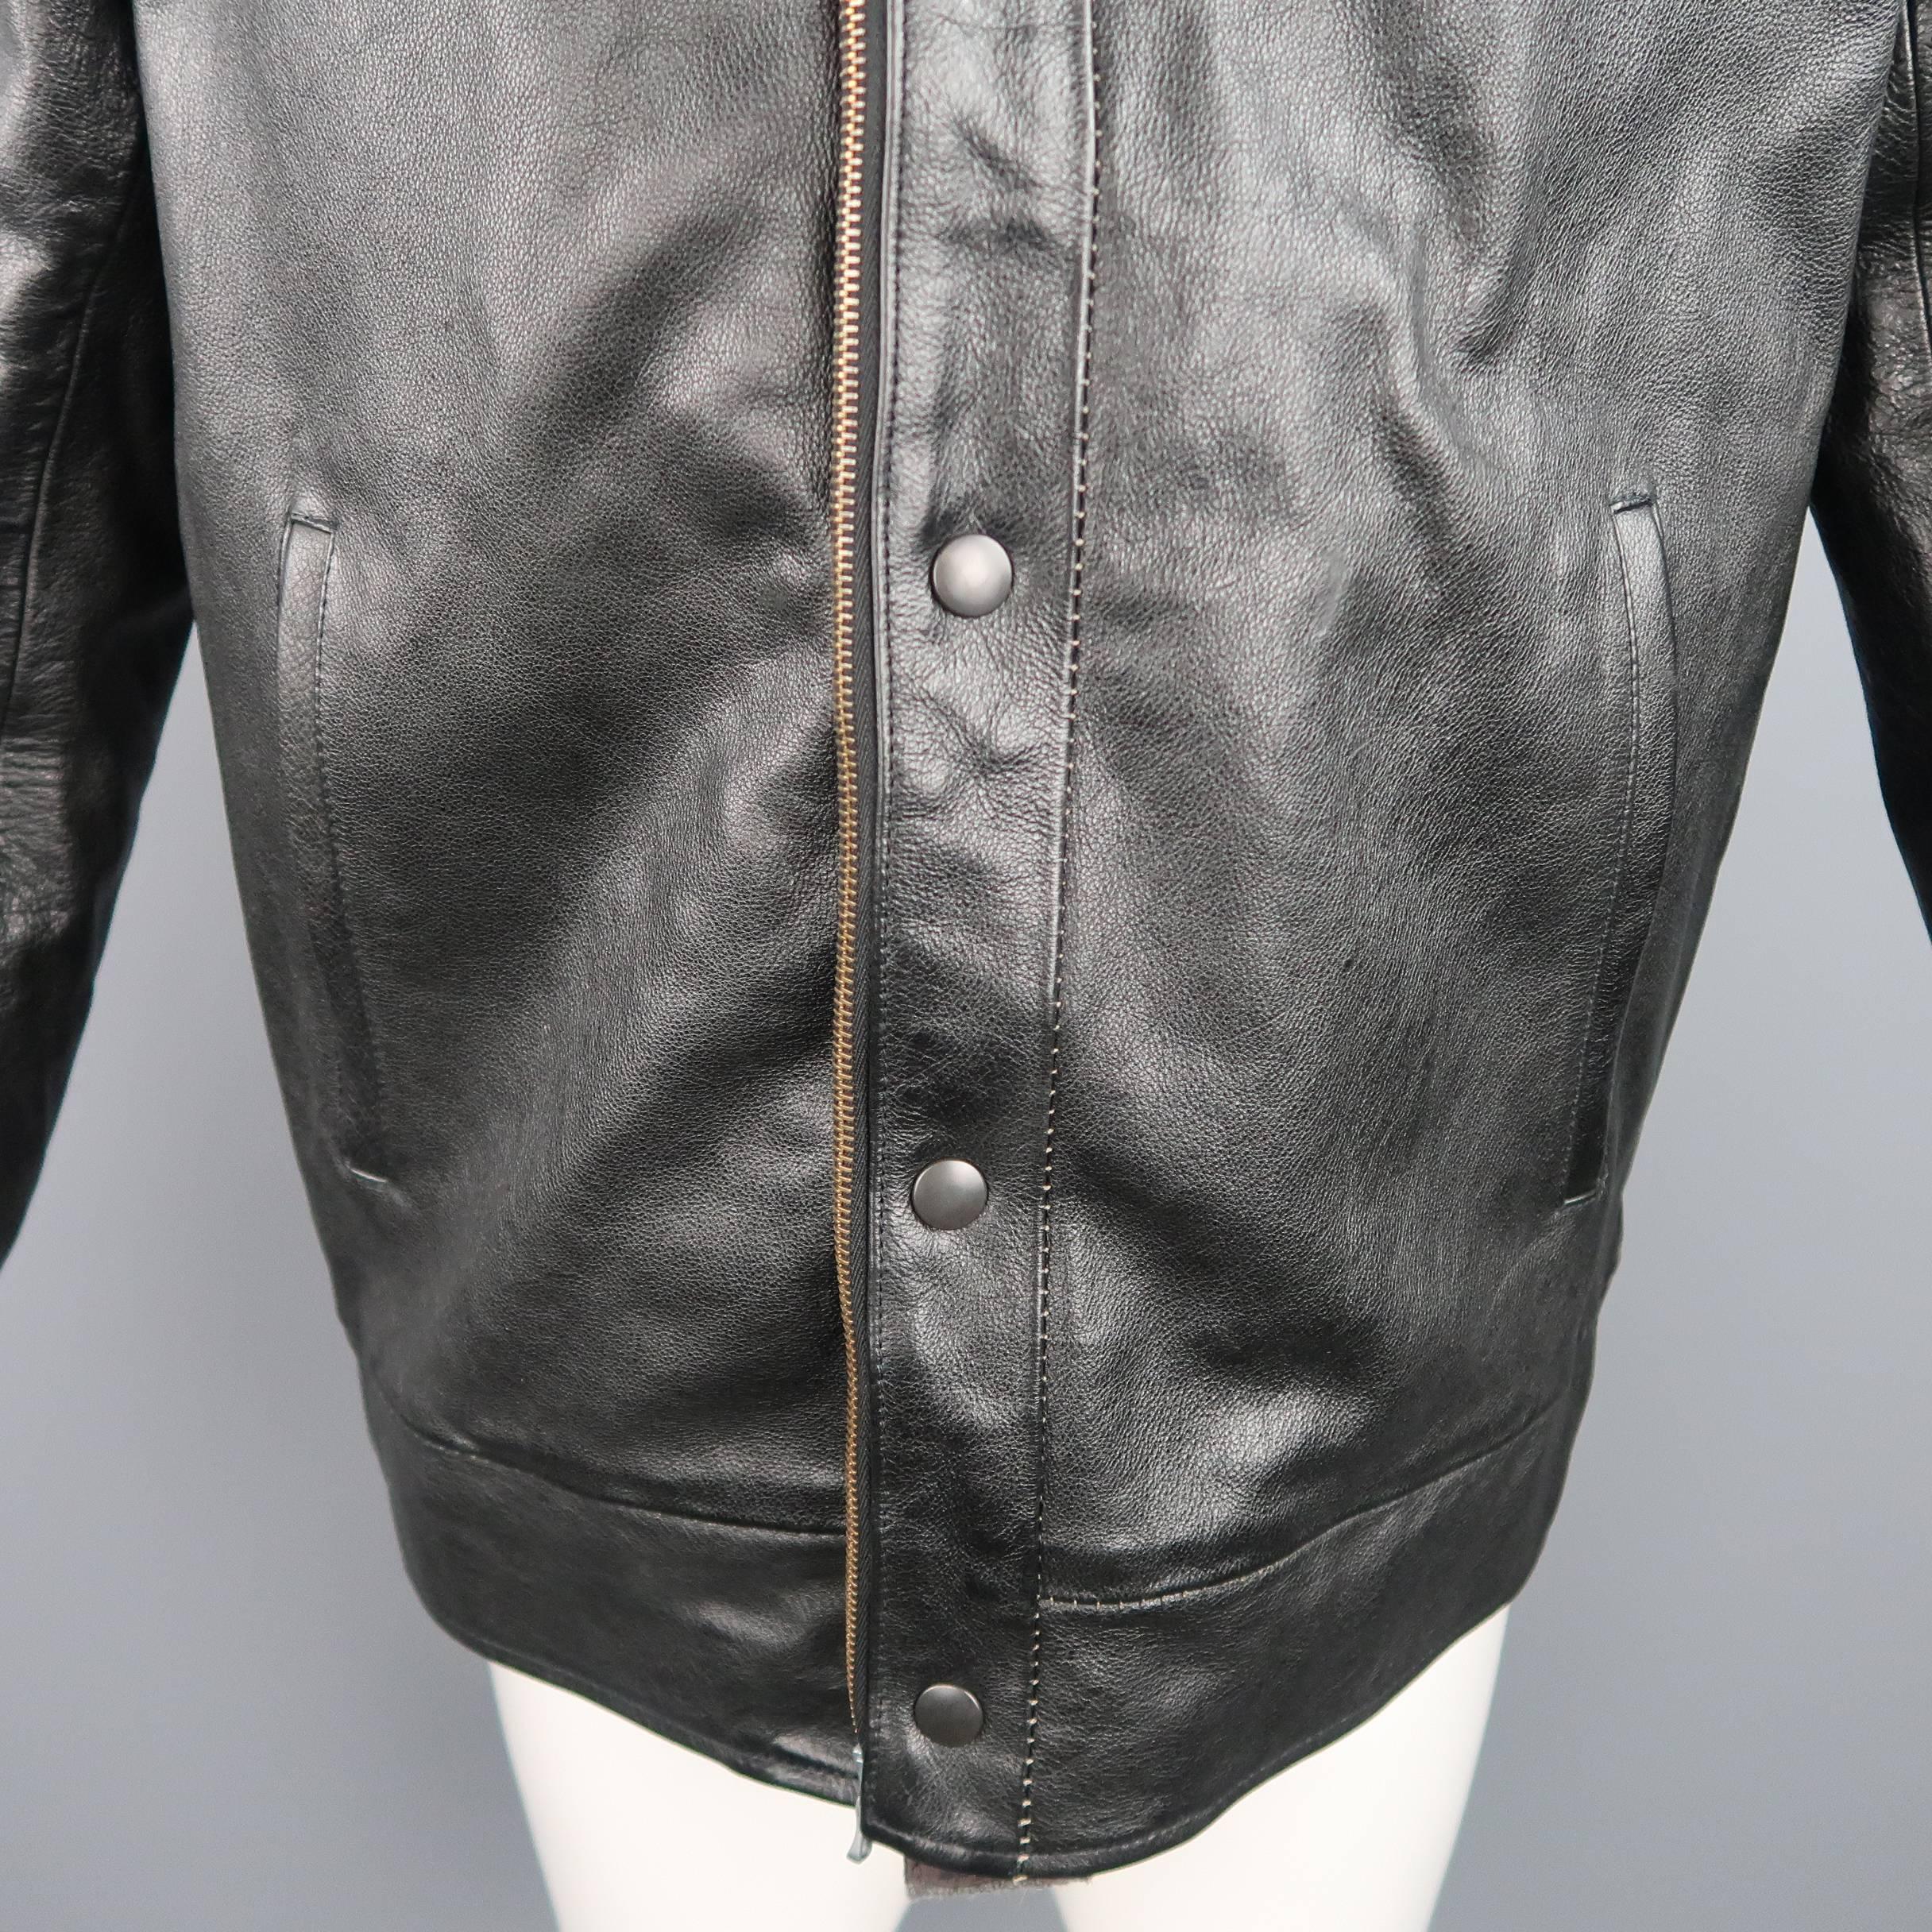 This 08SIRCUS by Kiminori Morishita bomber jacket comes in a textured black leather and features a high collar hood, raglan sleeves with contrast stitches and tab cuffs, slit pockets, snap closure, and gray wool knit detachable zip off liner. Made